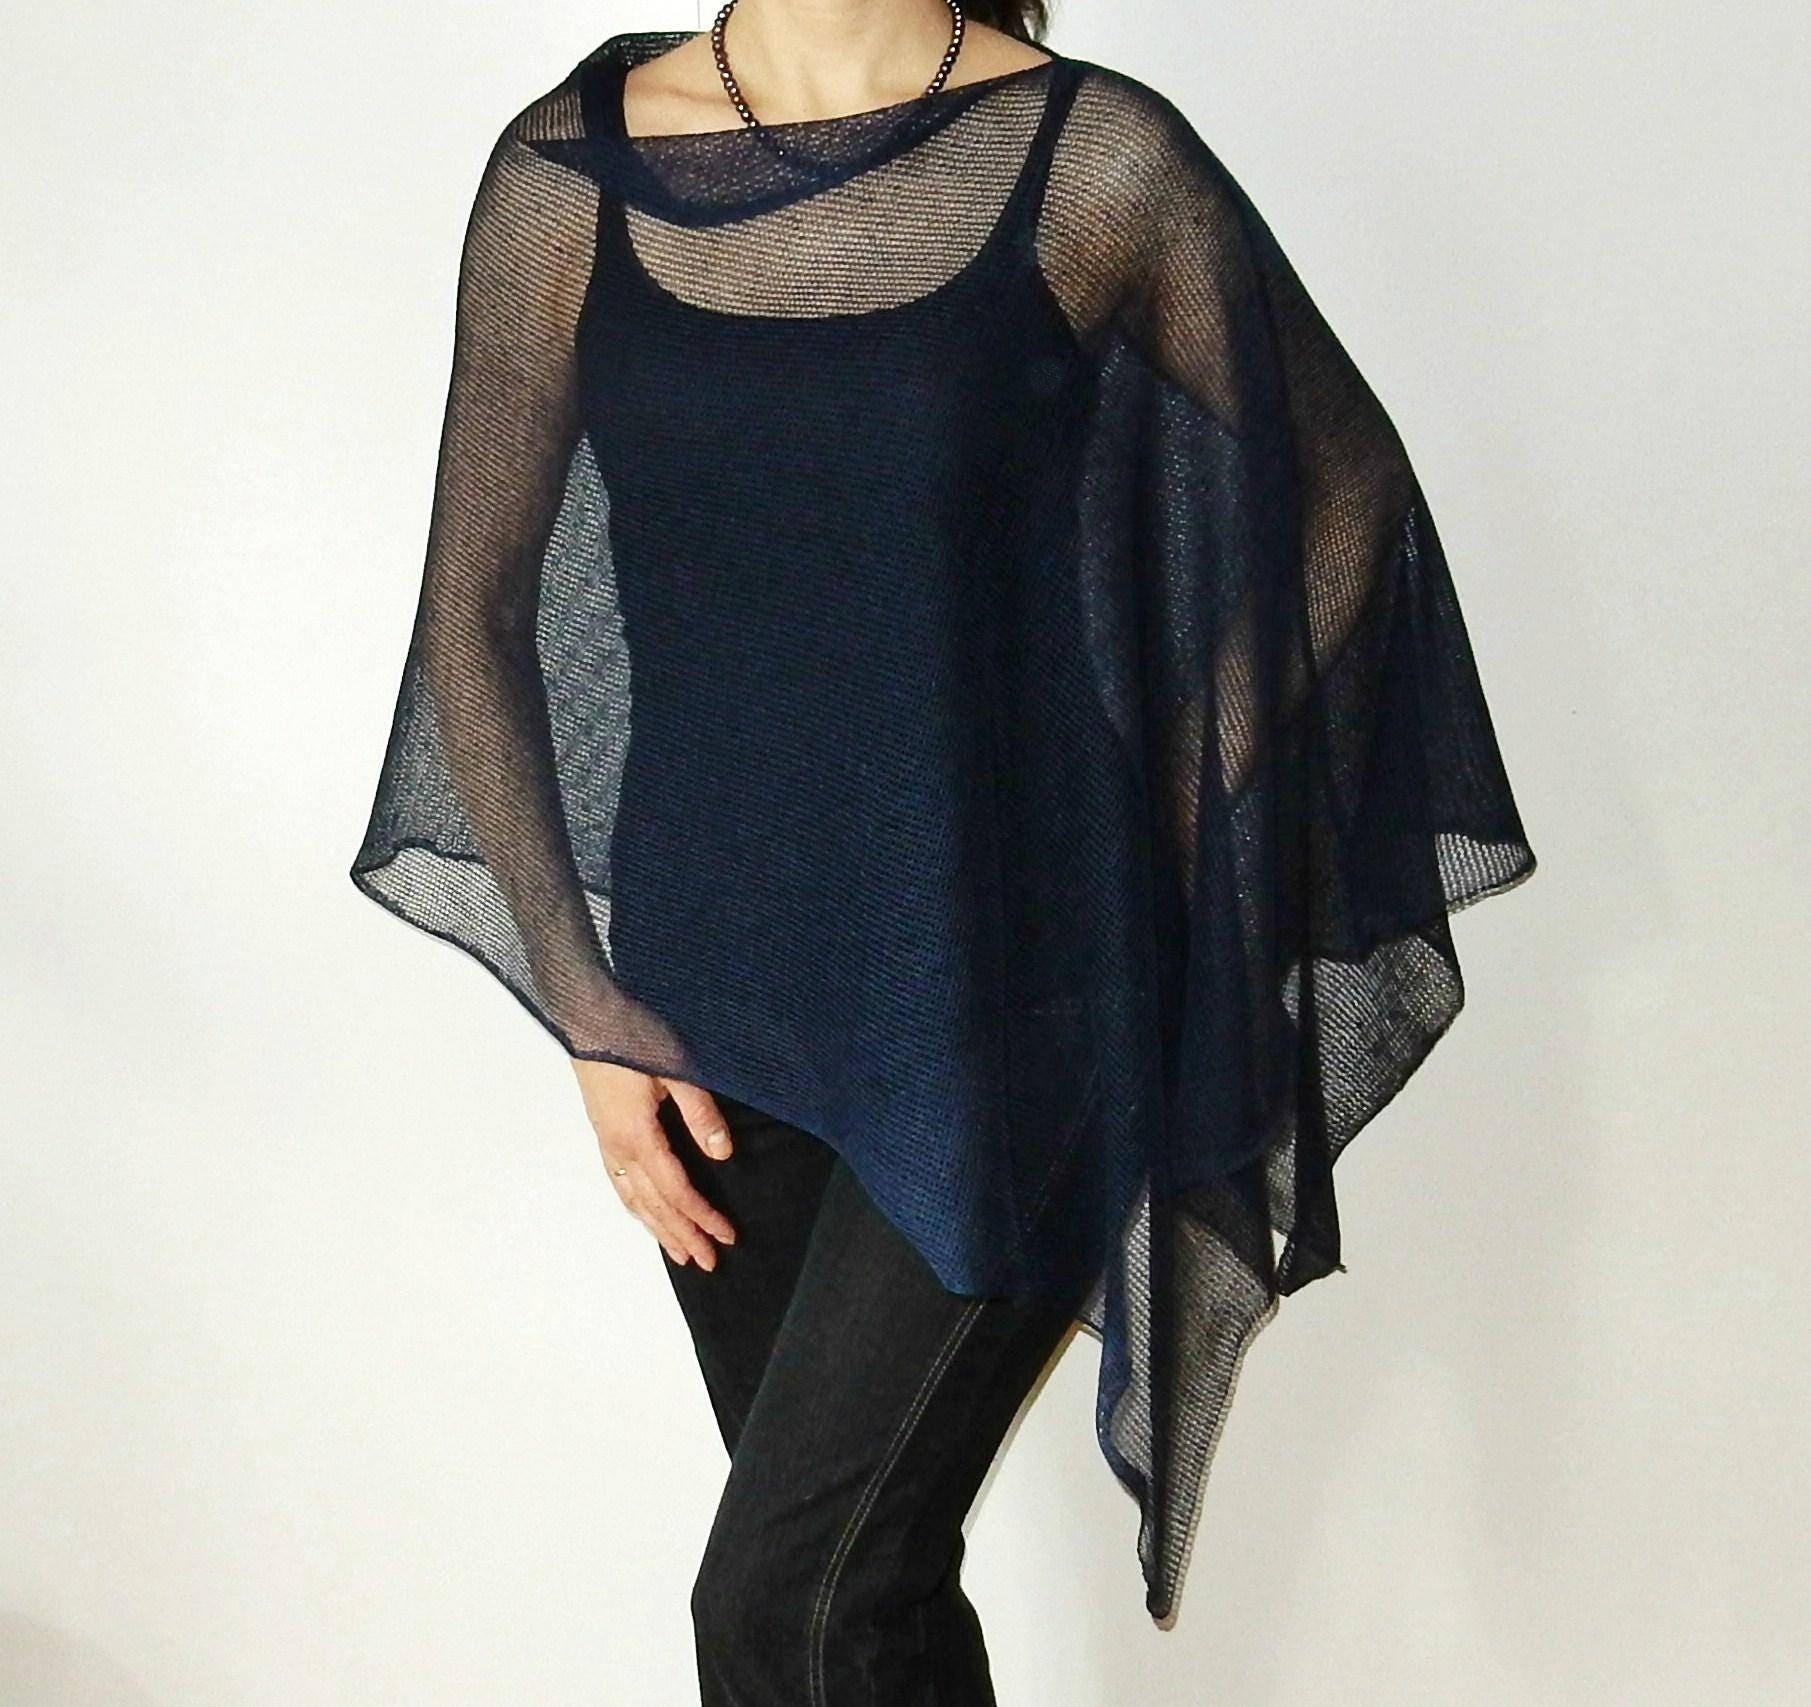 50 Donna Gerry WeberGerry Weber Edition Cape/Poncho Outdoor Marca Blu Navy 